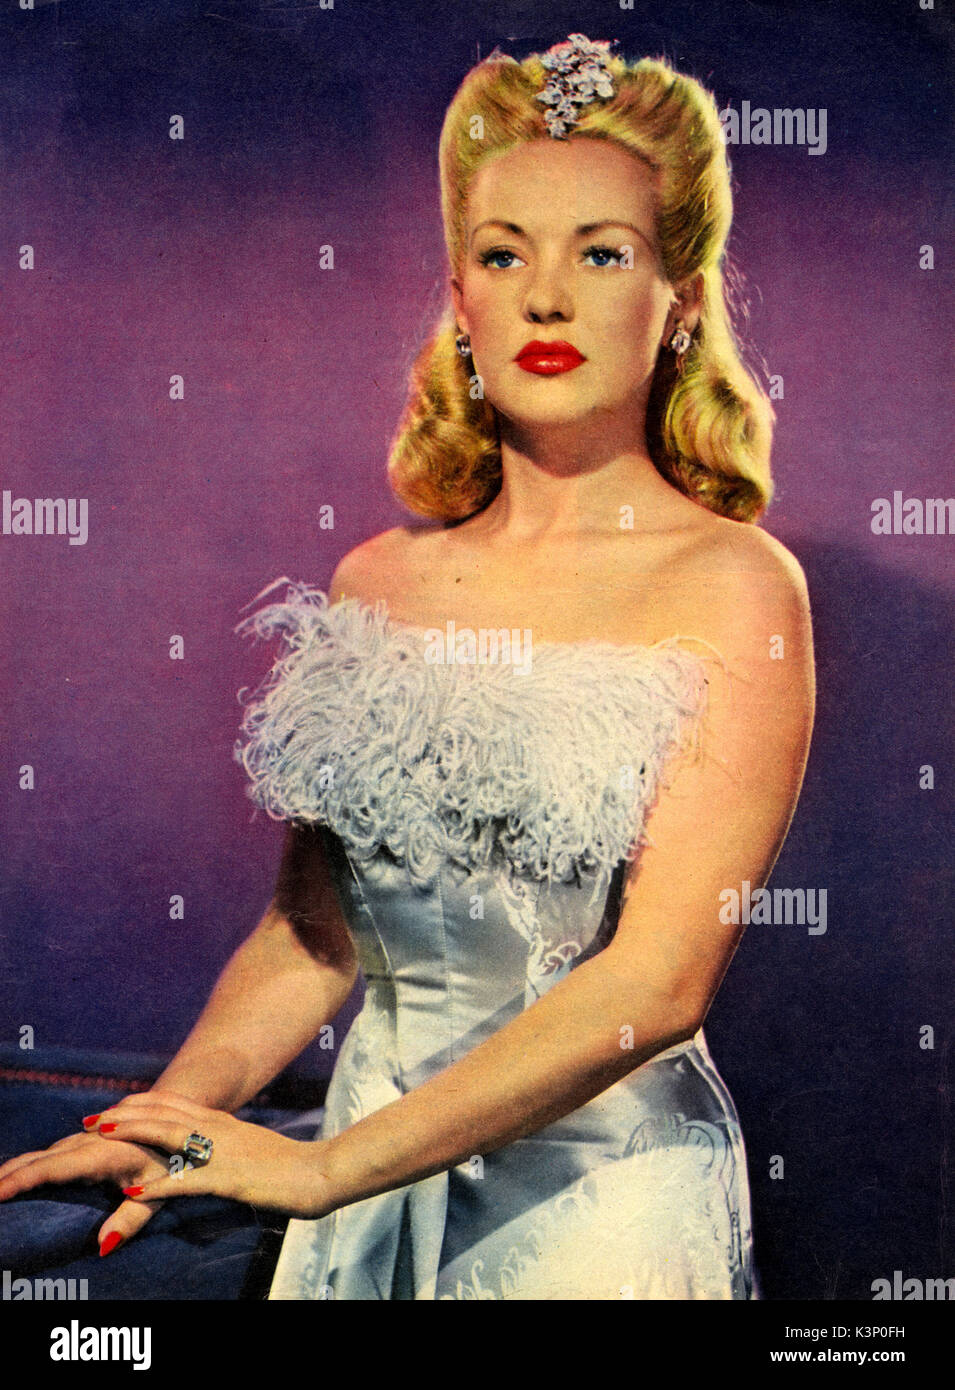 BETTY GRABLE [1916 - 1973] American Actress, Singer     Date: 1973 Stock Photo